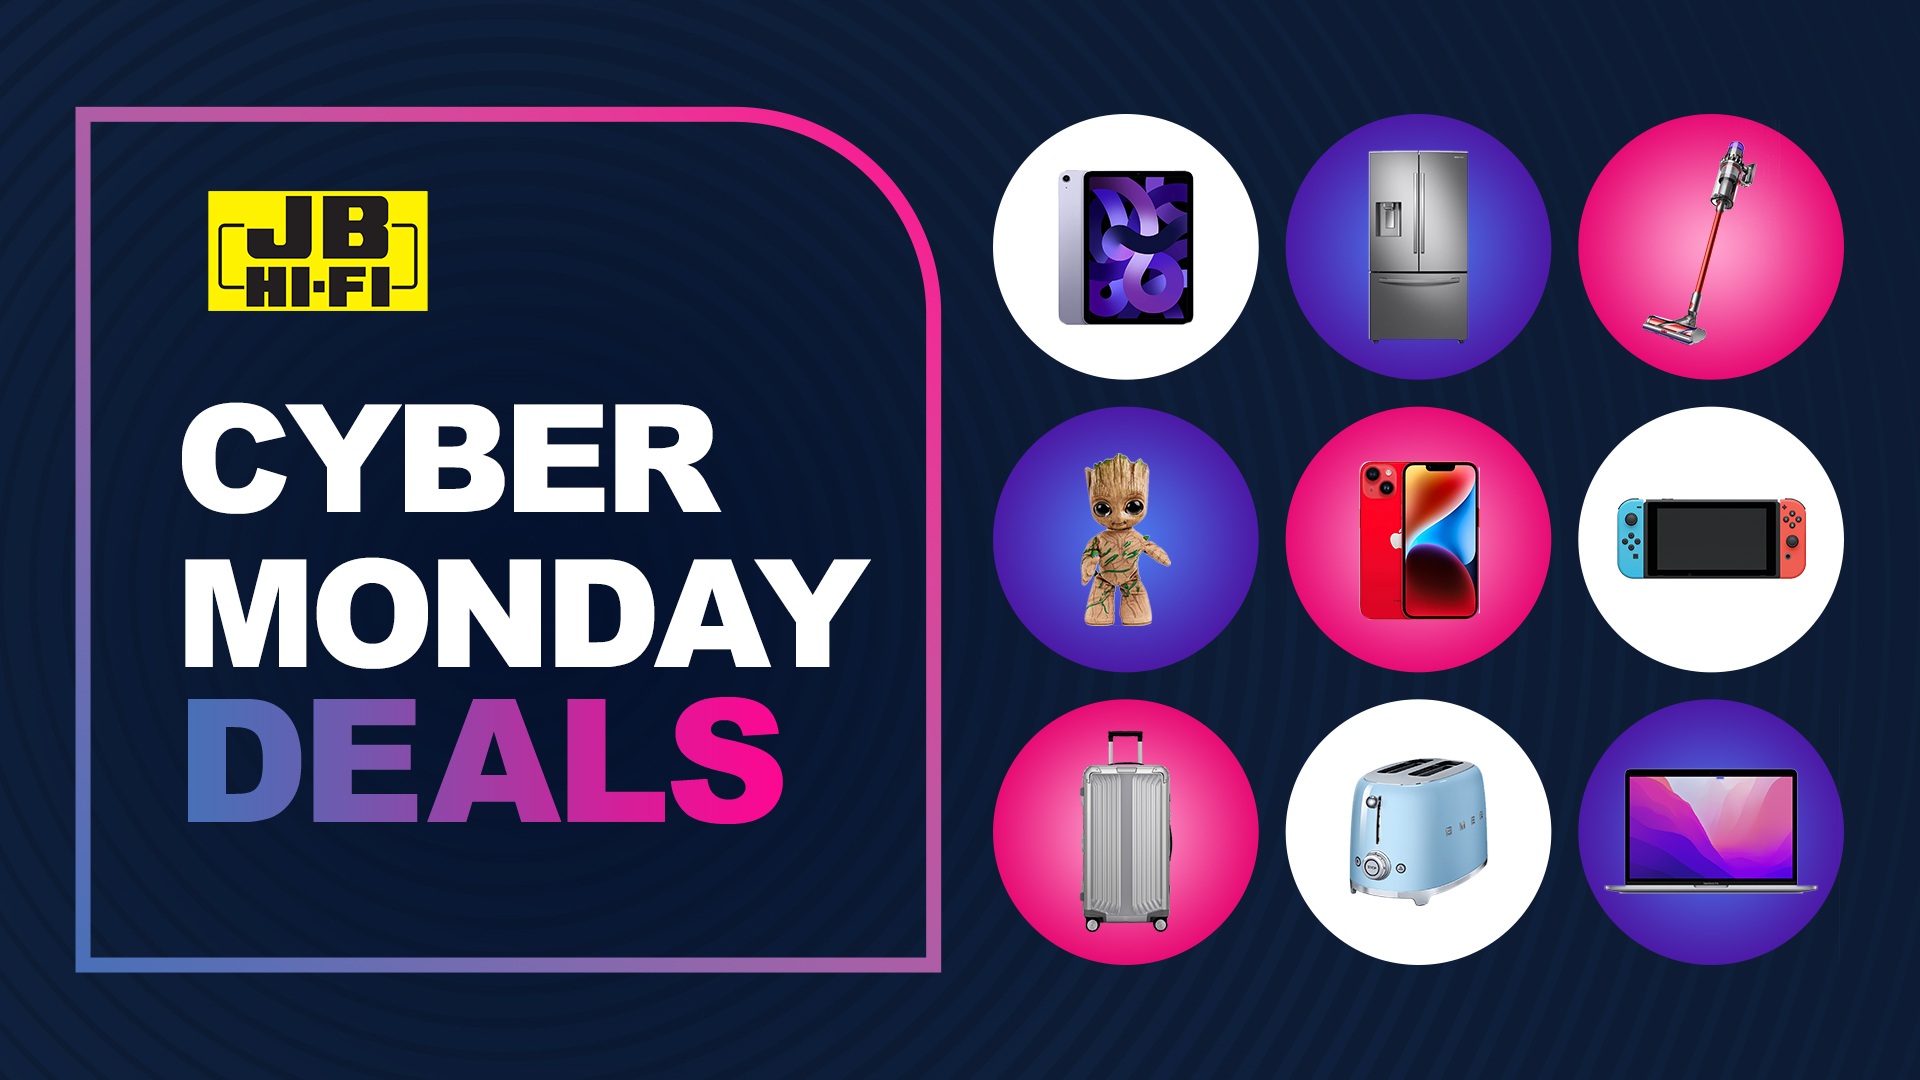 Cyber Monday sale slashes prices on a bunch of Blue USB